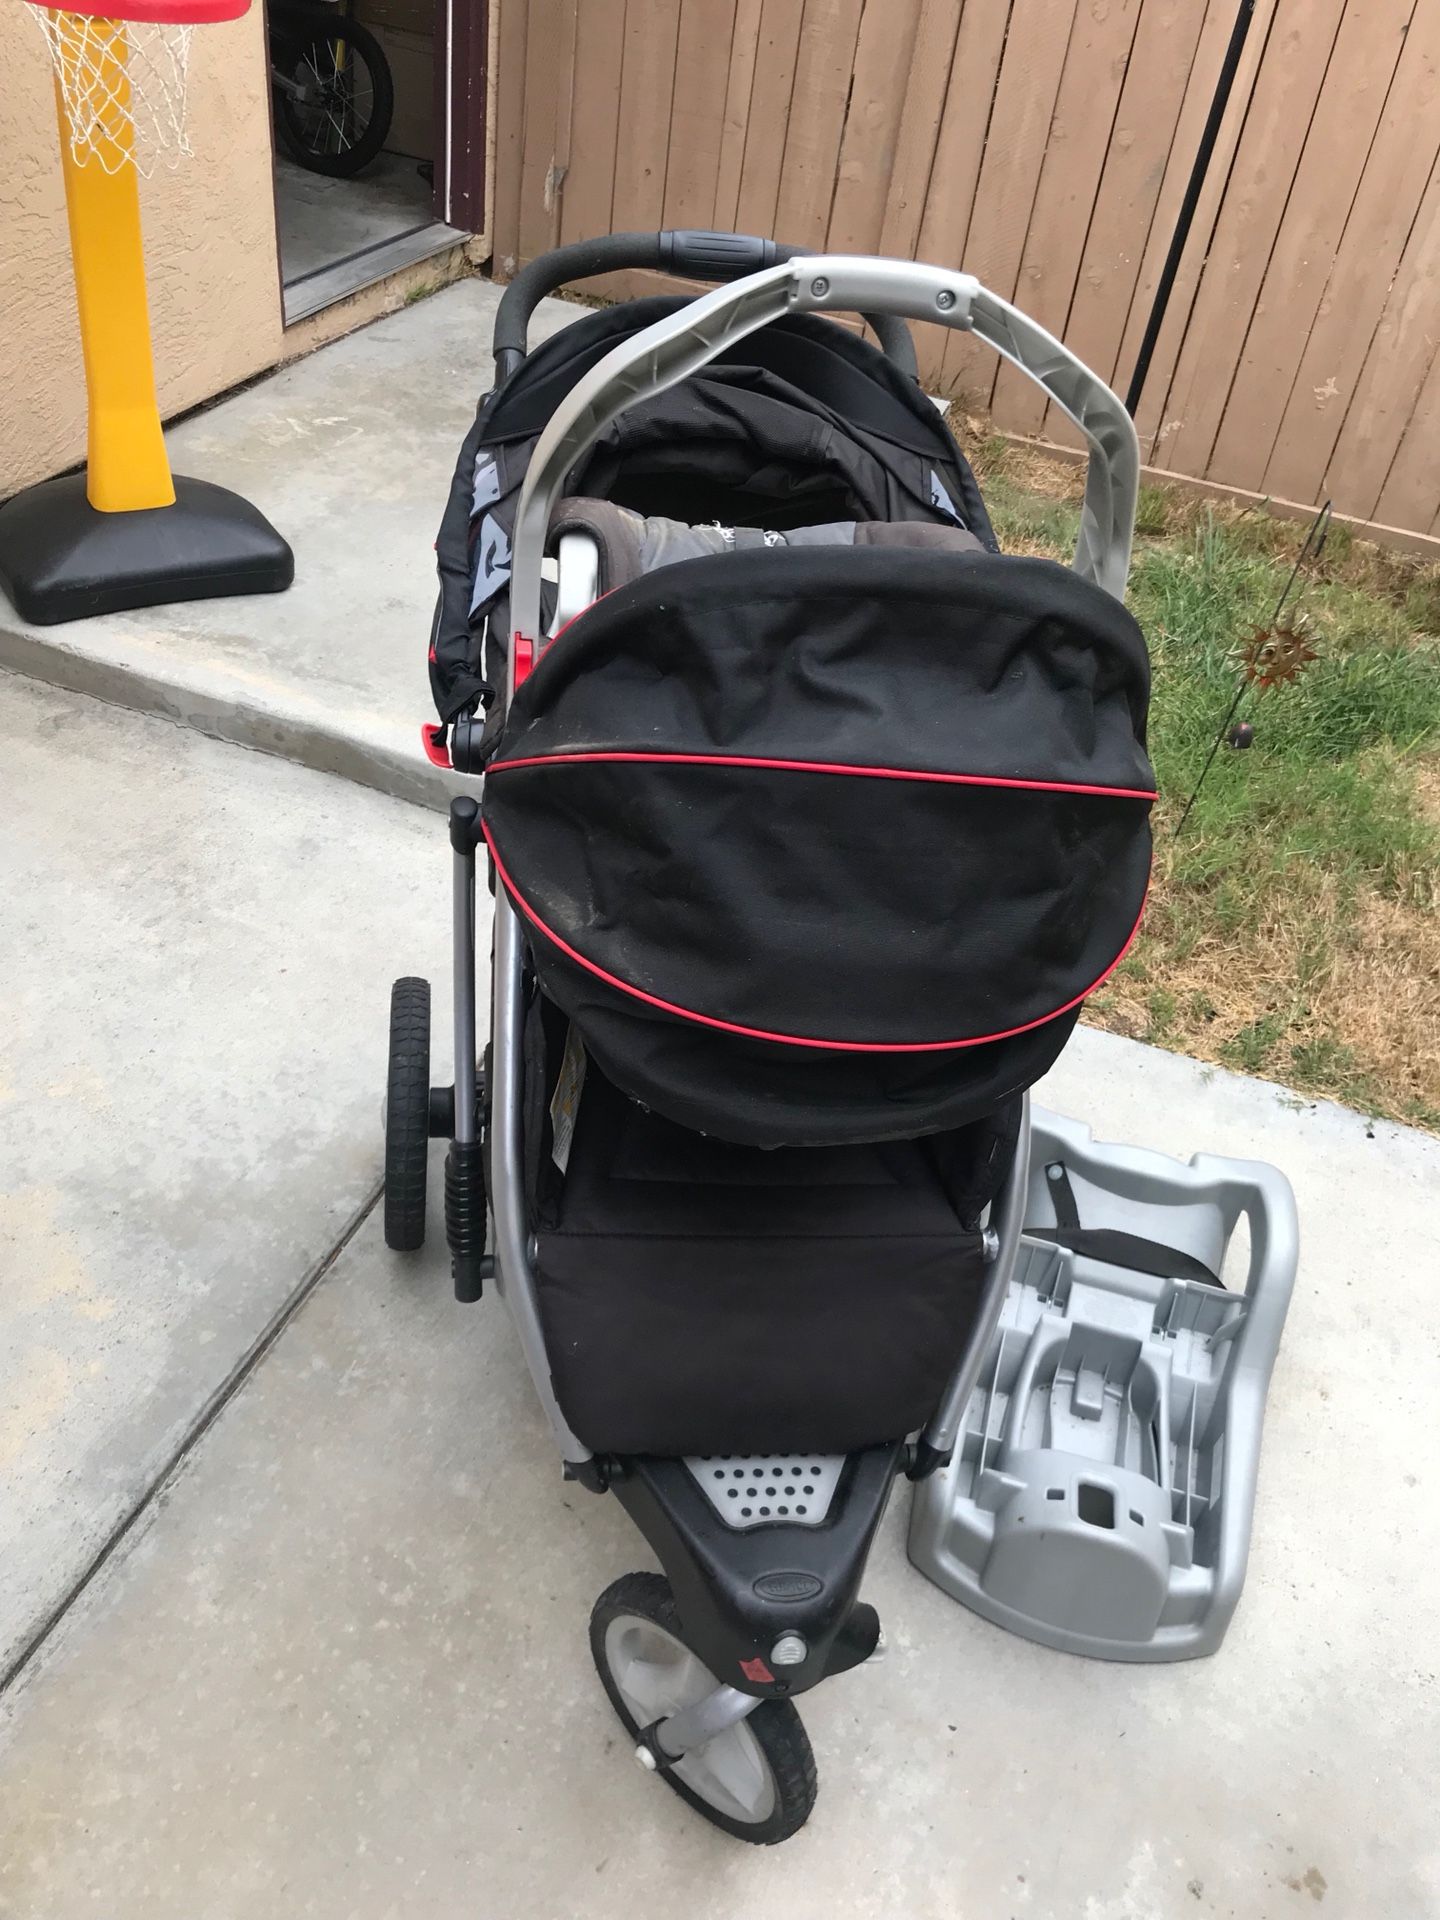 Graco jogging stroller and car seat